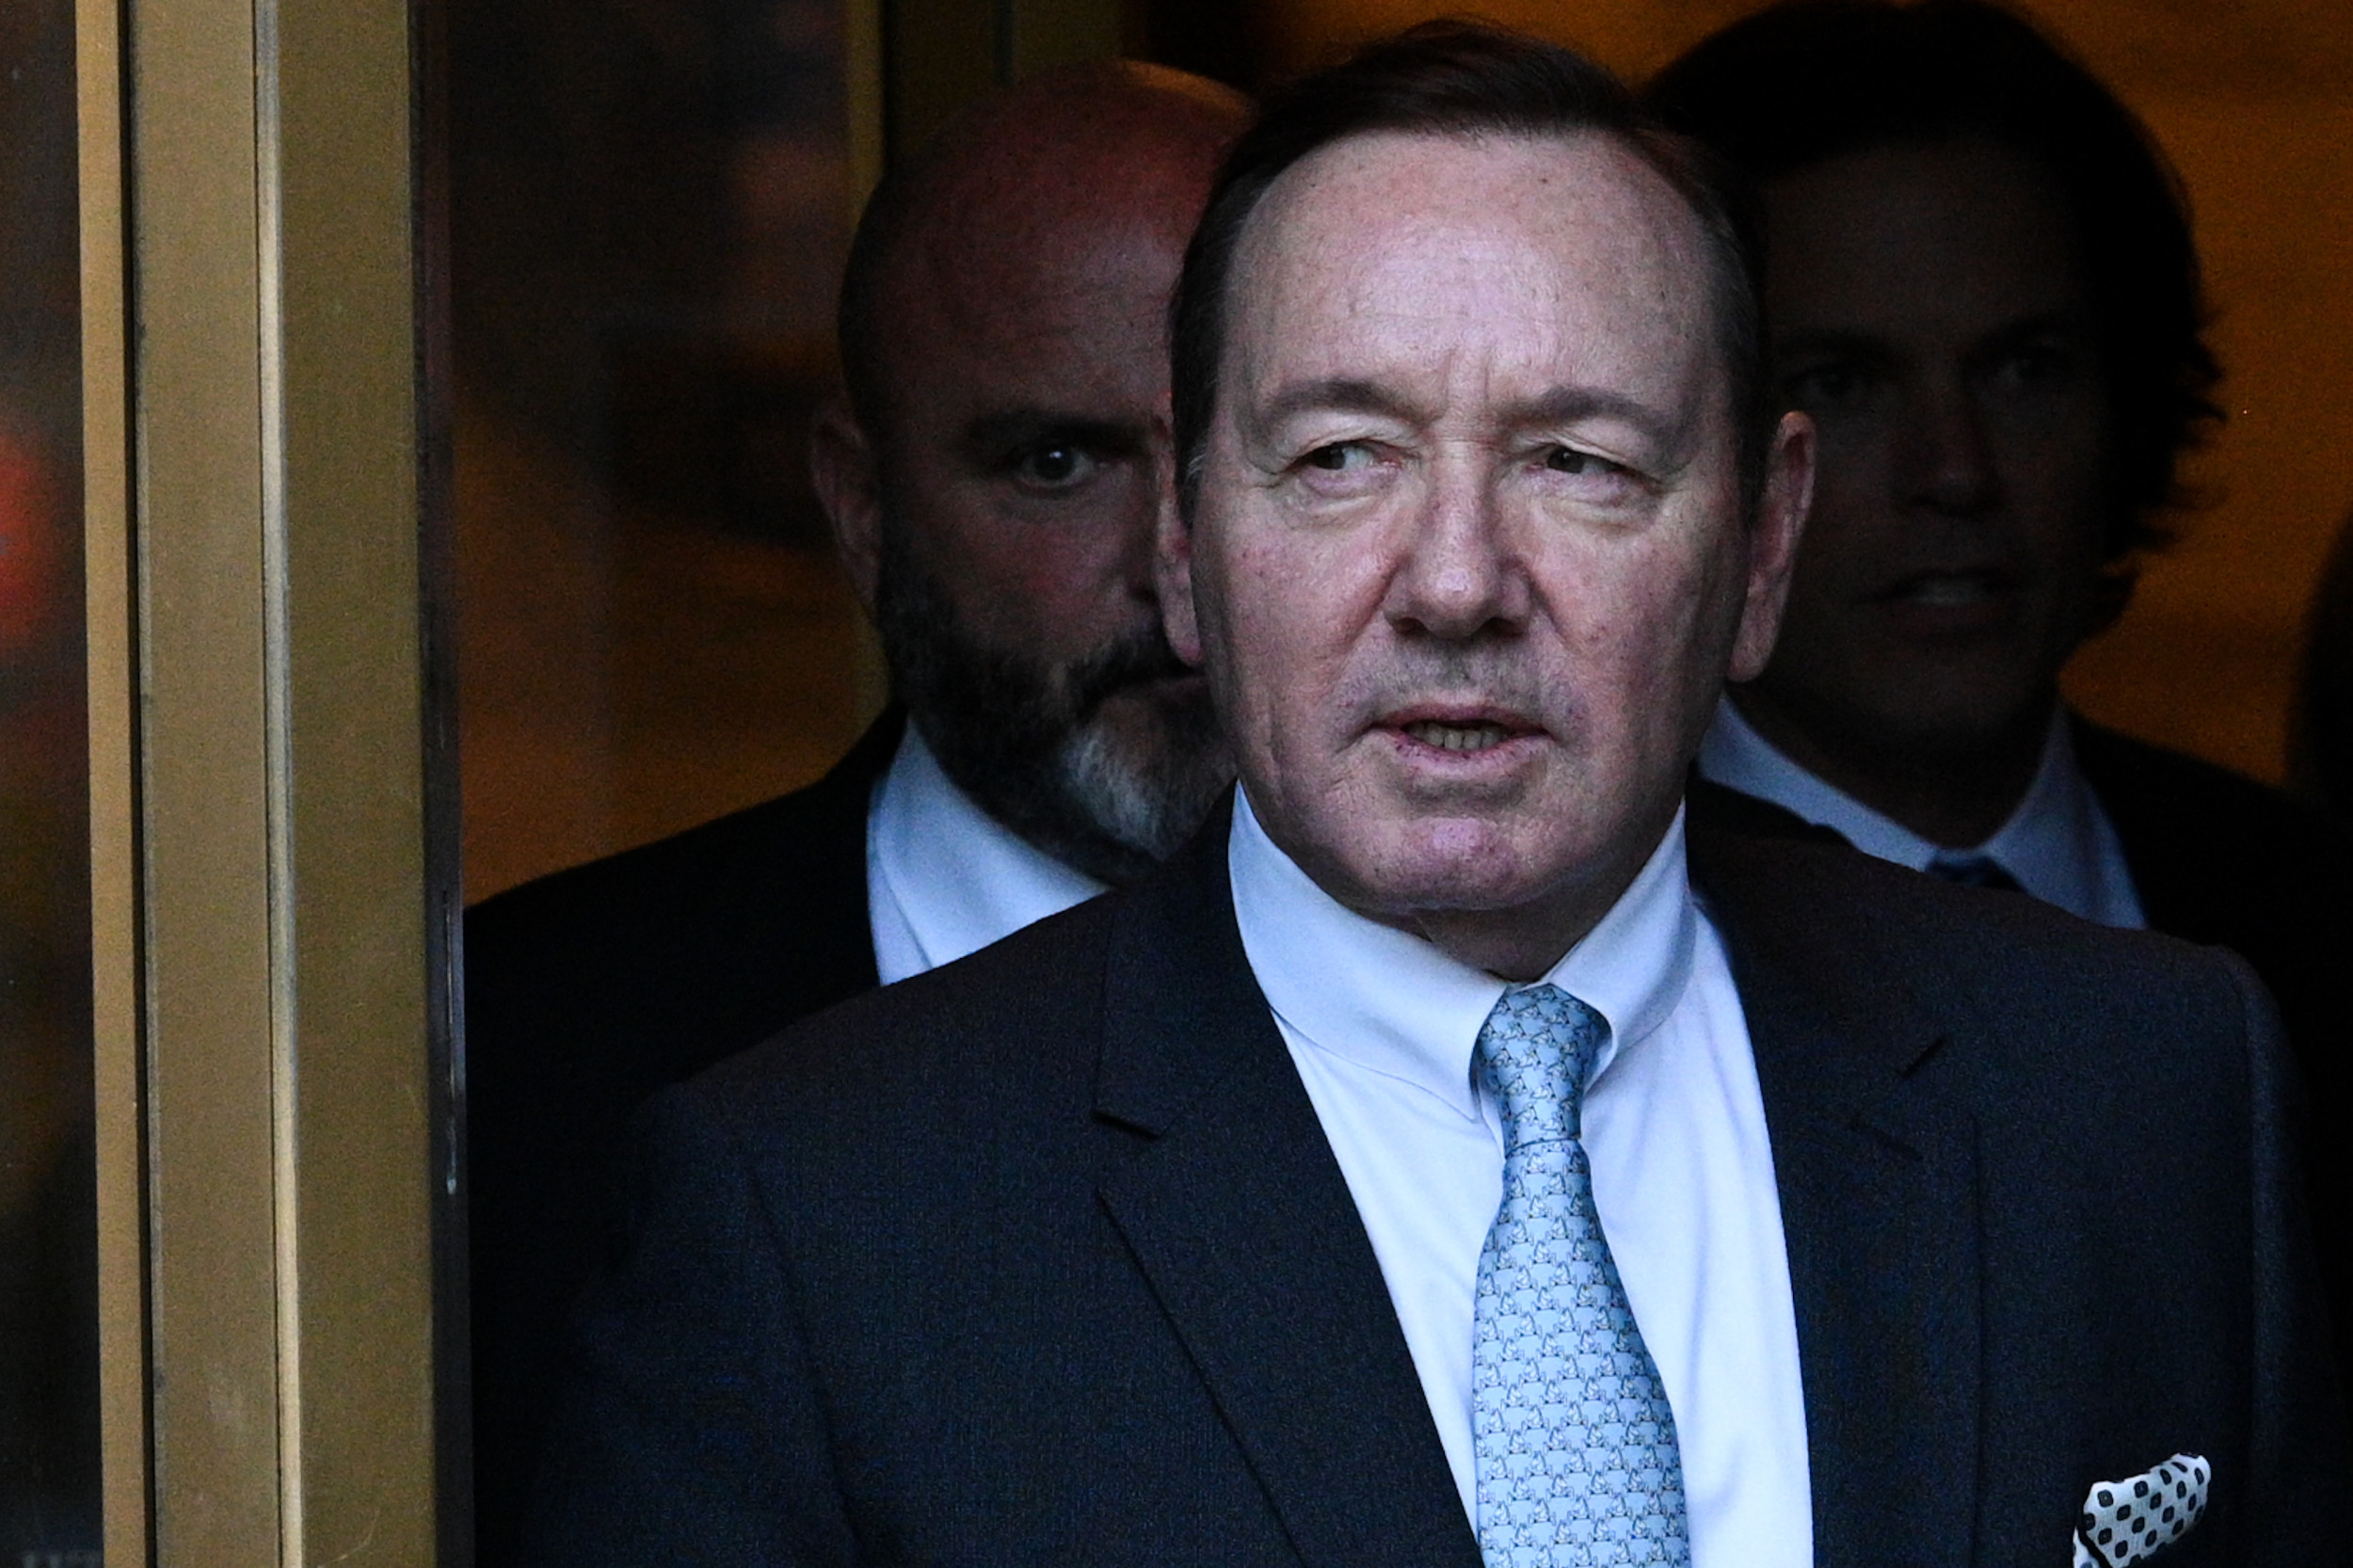 Jury Sides With Kevin Spacey Over Anthony Rapps Sexual Misconduct Claim